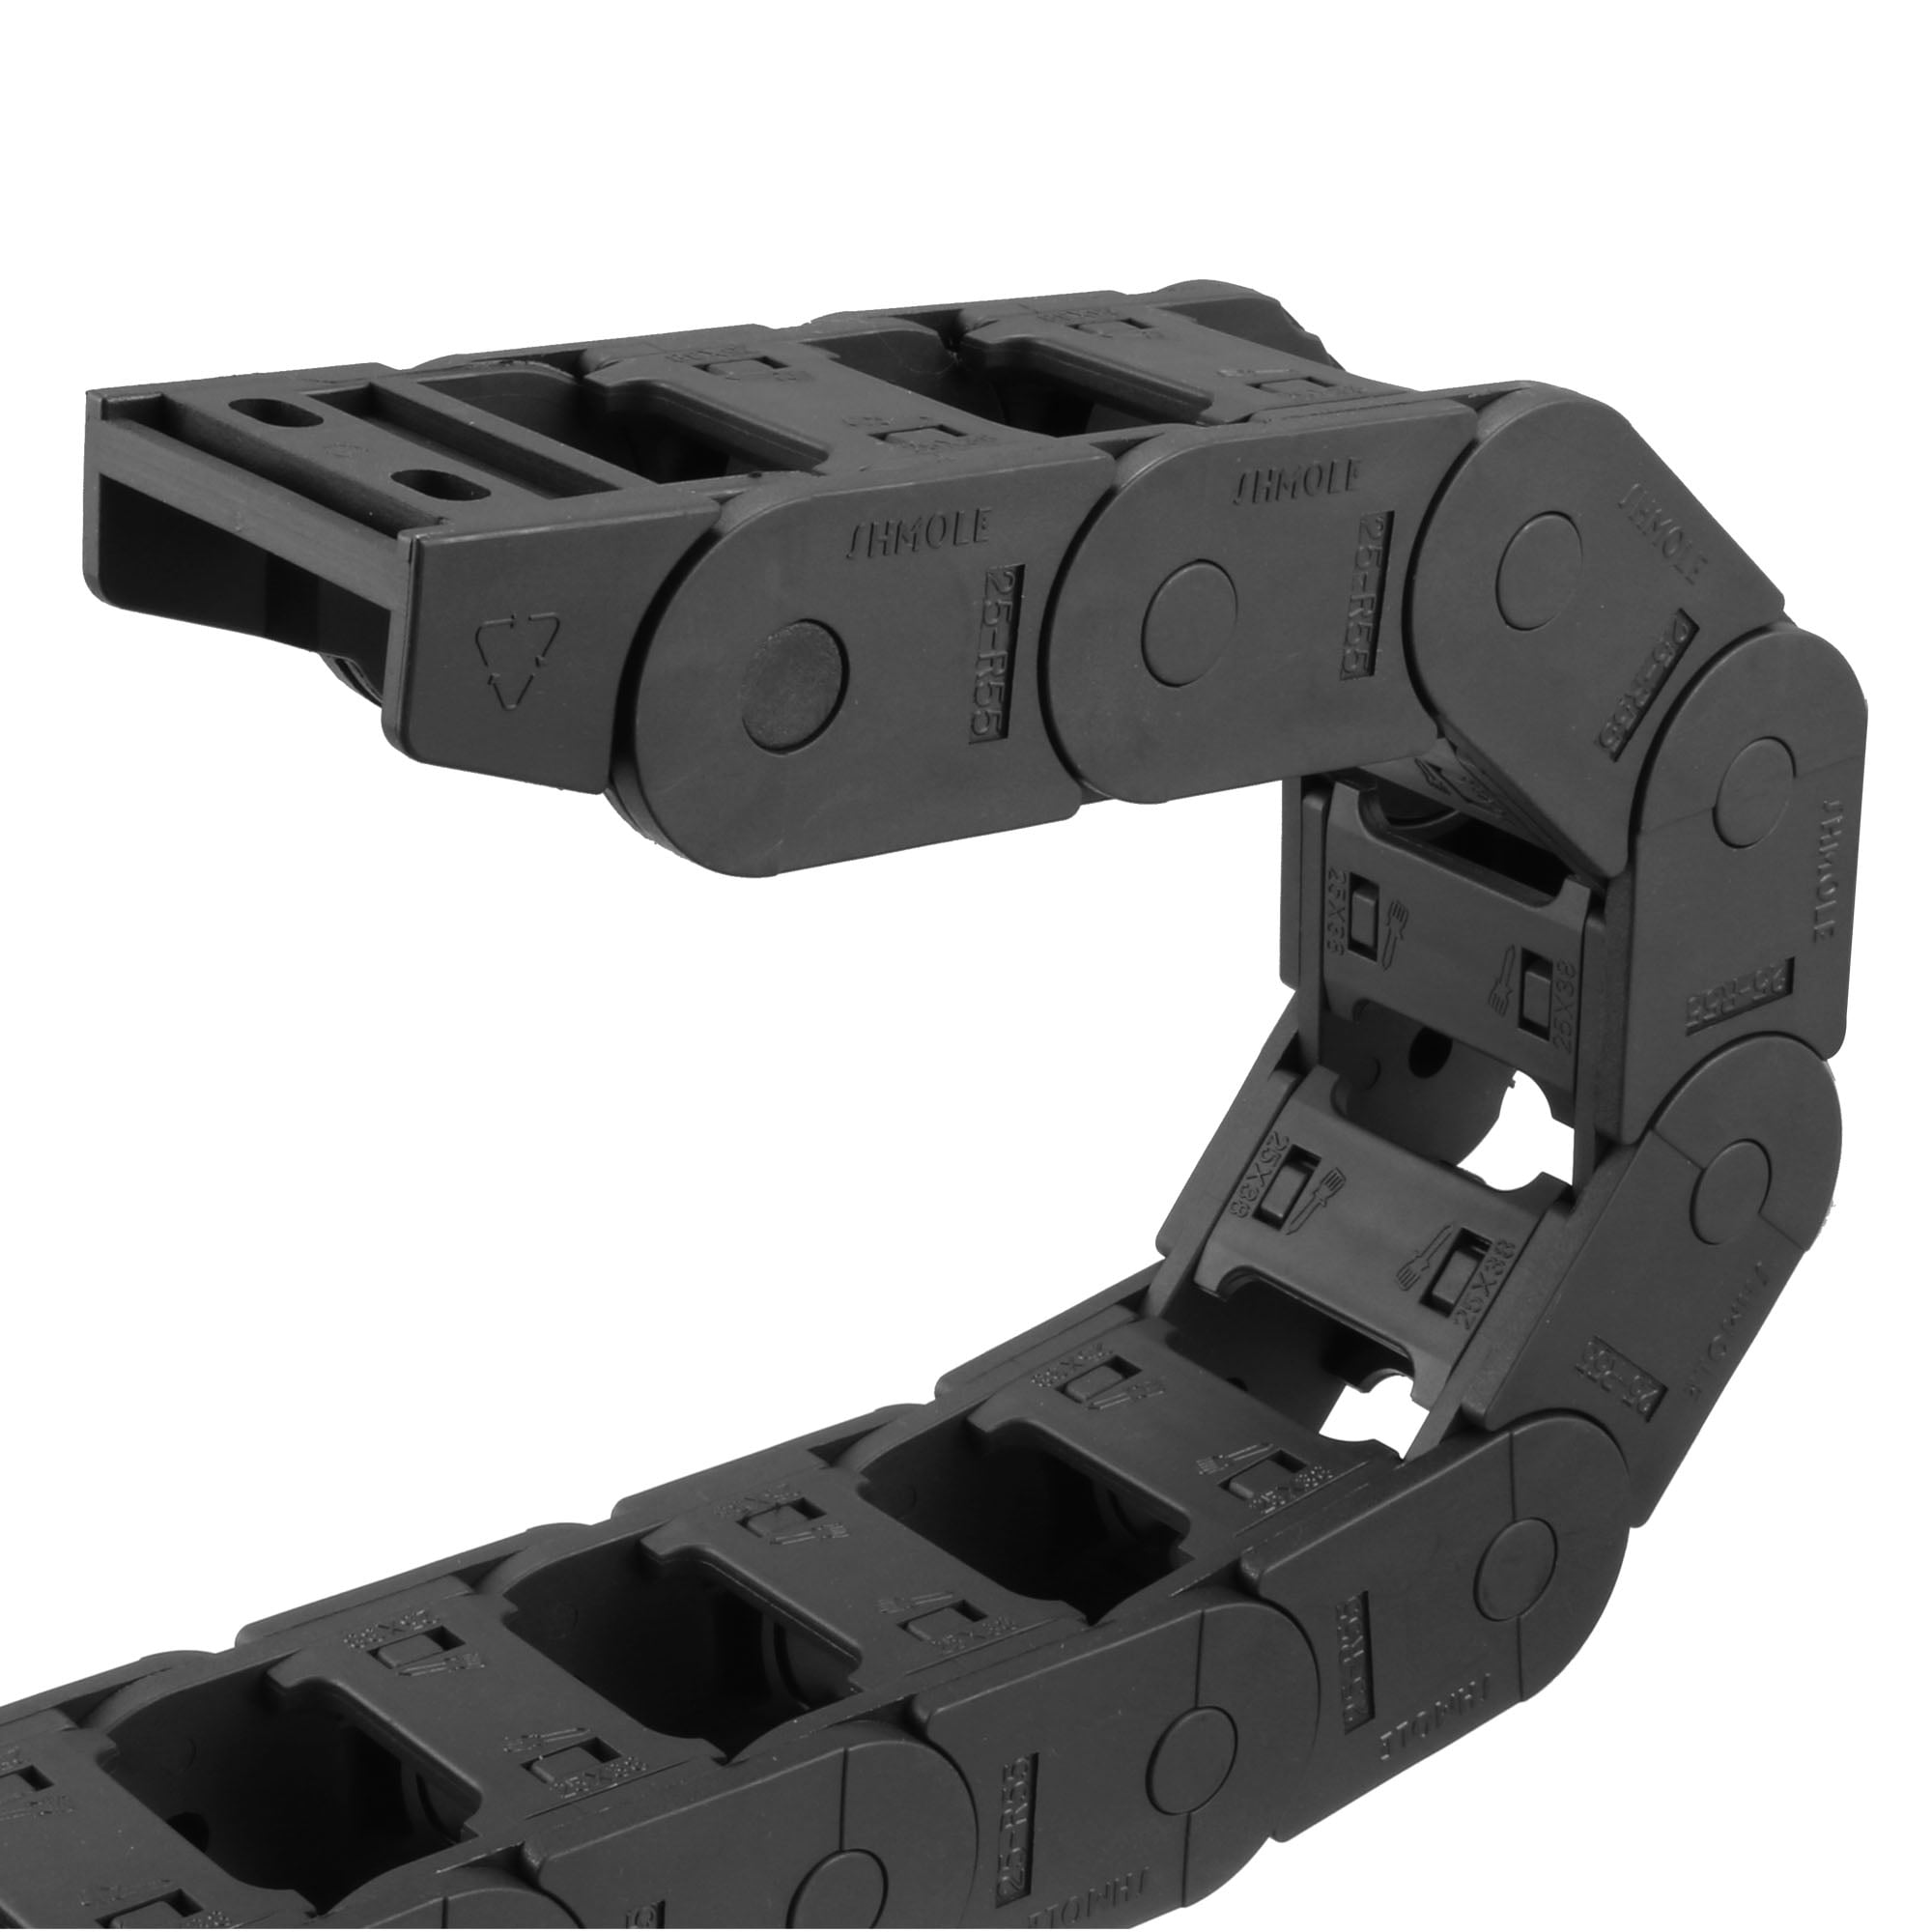 Drag Chain Cable Carrier with End Connectors 25X38mm 1 Meter Plastic for Electrical CNC Router Machines Black 